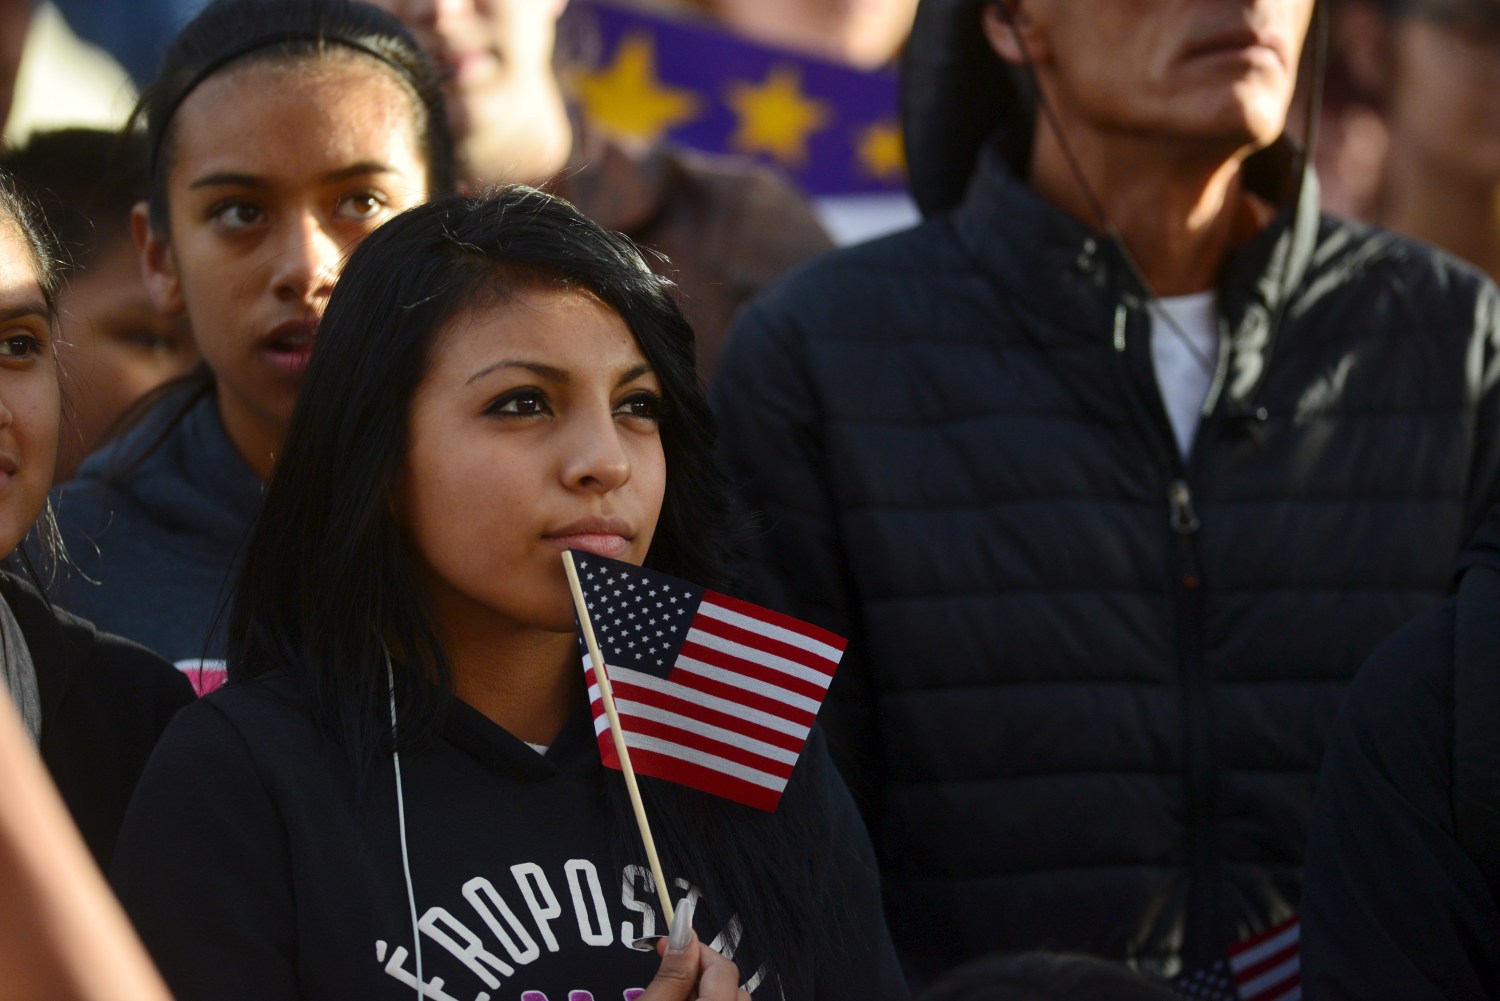 Latino leaders and immigration reform supporters gather at Farrand Field on the campus of the University of Colorado